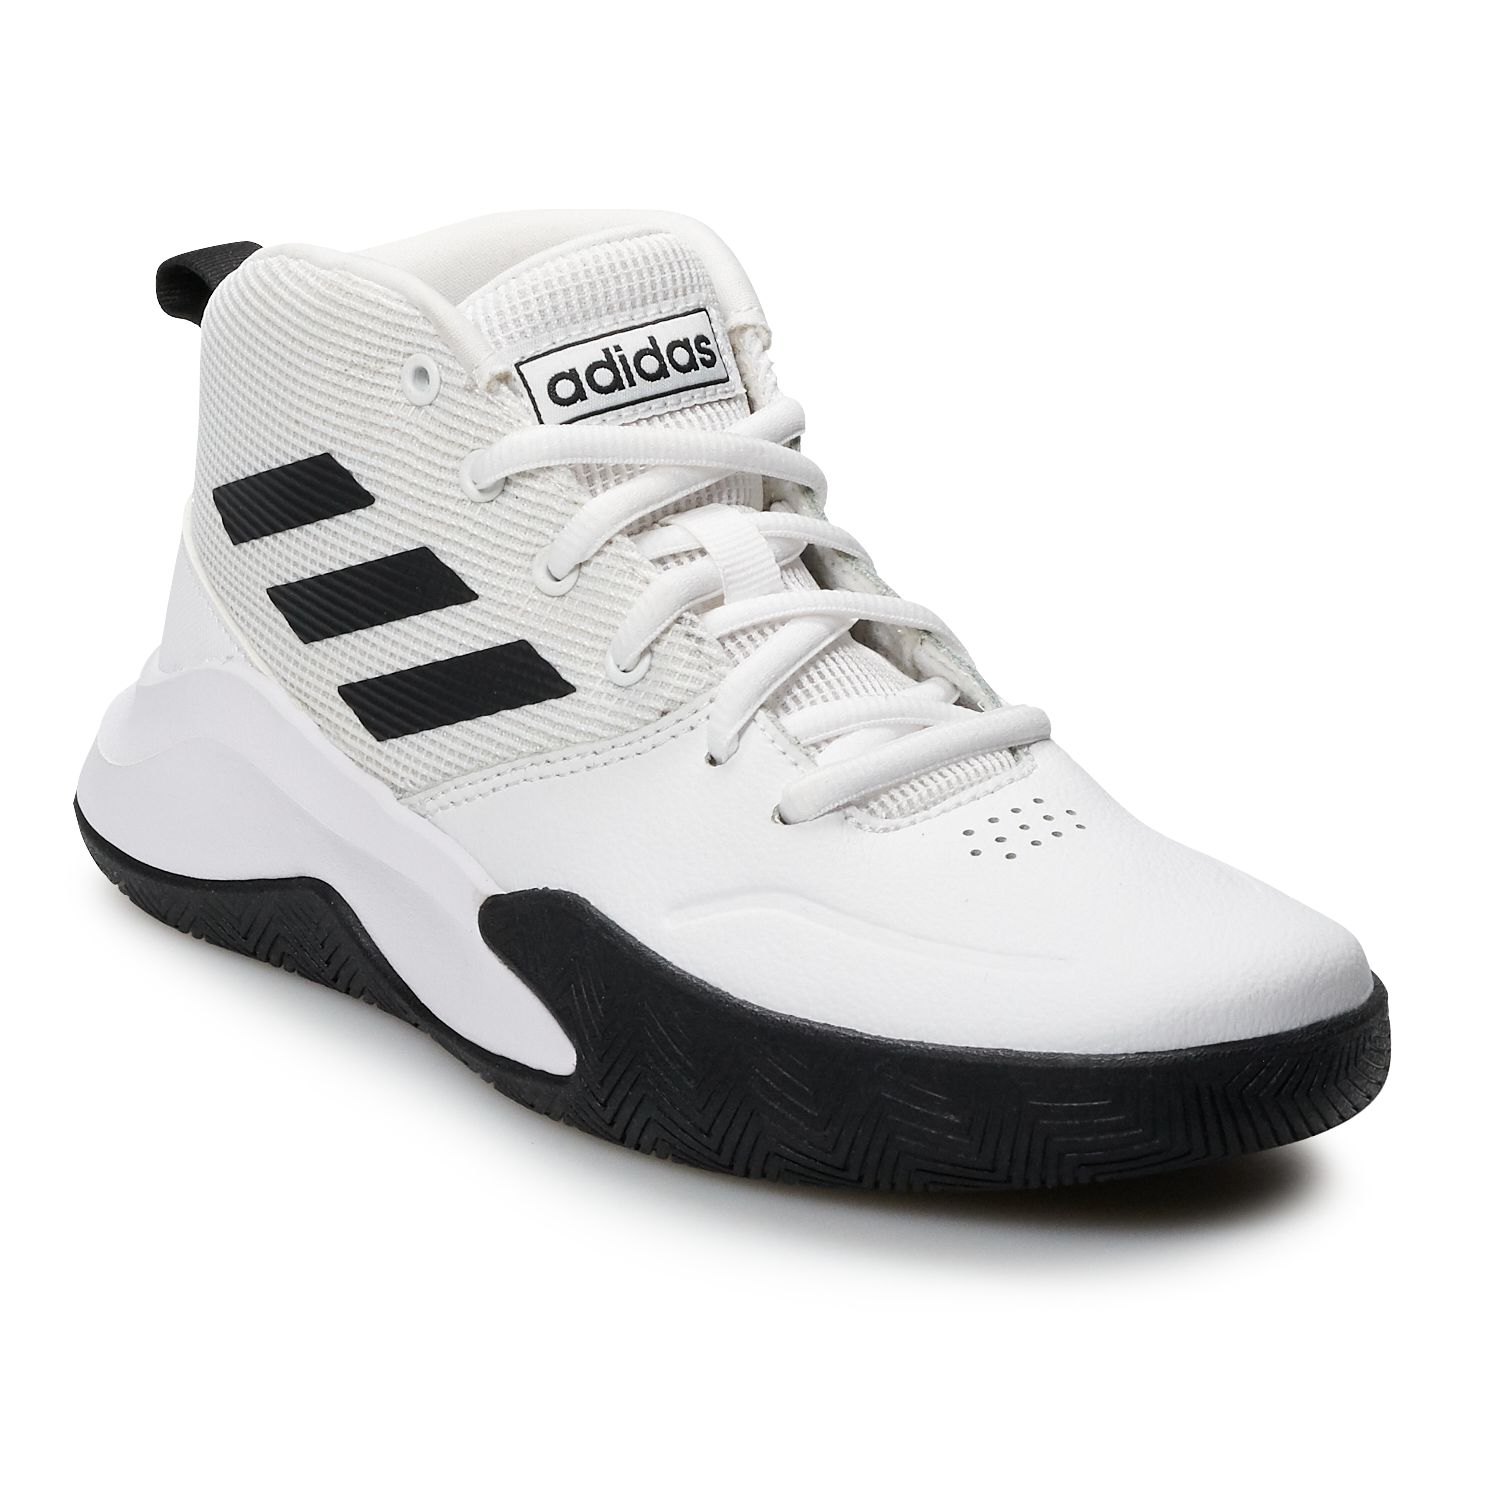 adidas own the game basketball shoes